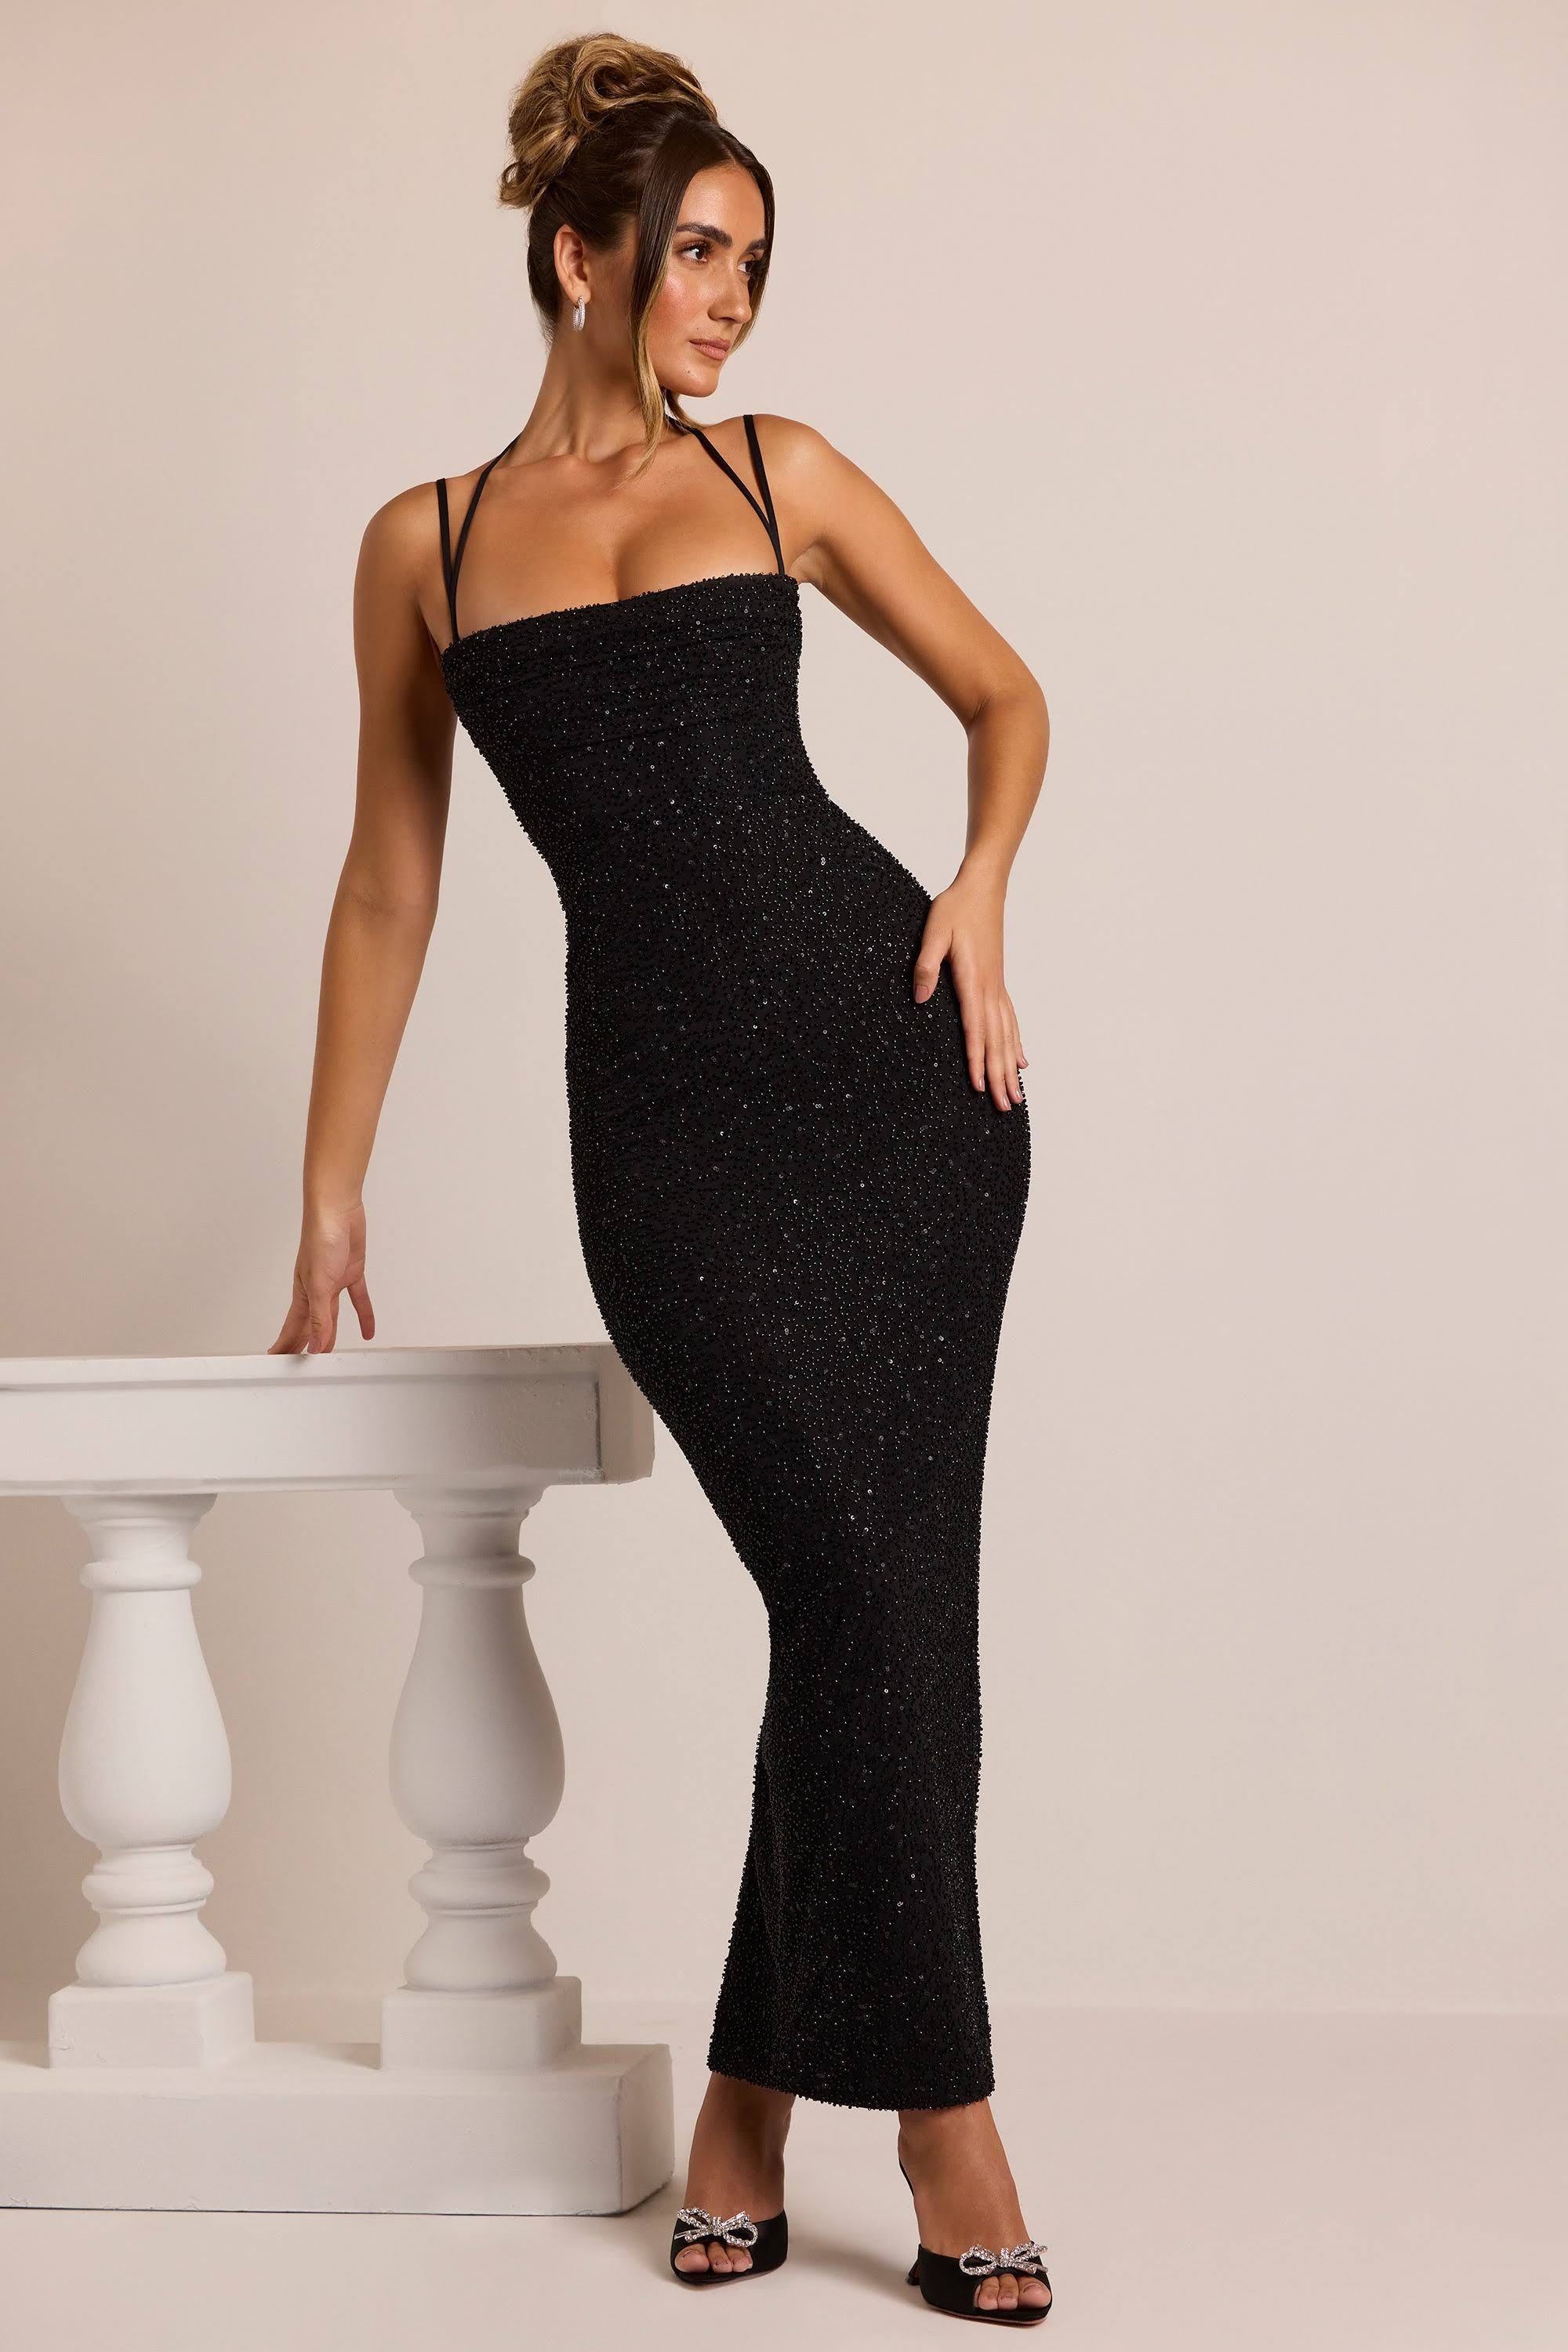 Stunning Black Sequin Maxi Dress by Oh Polly | Image